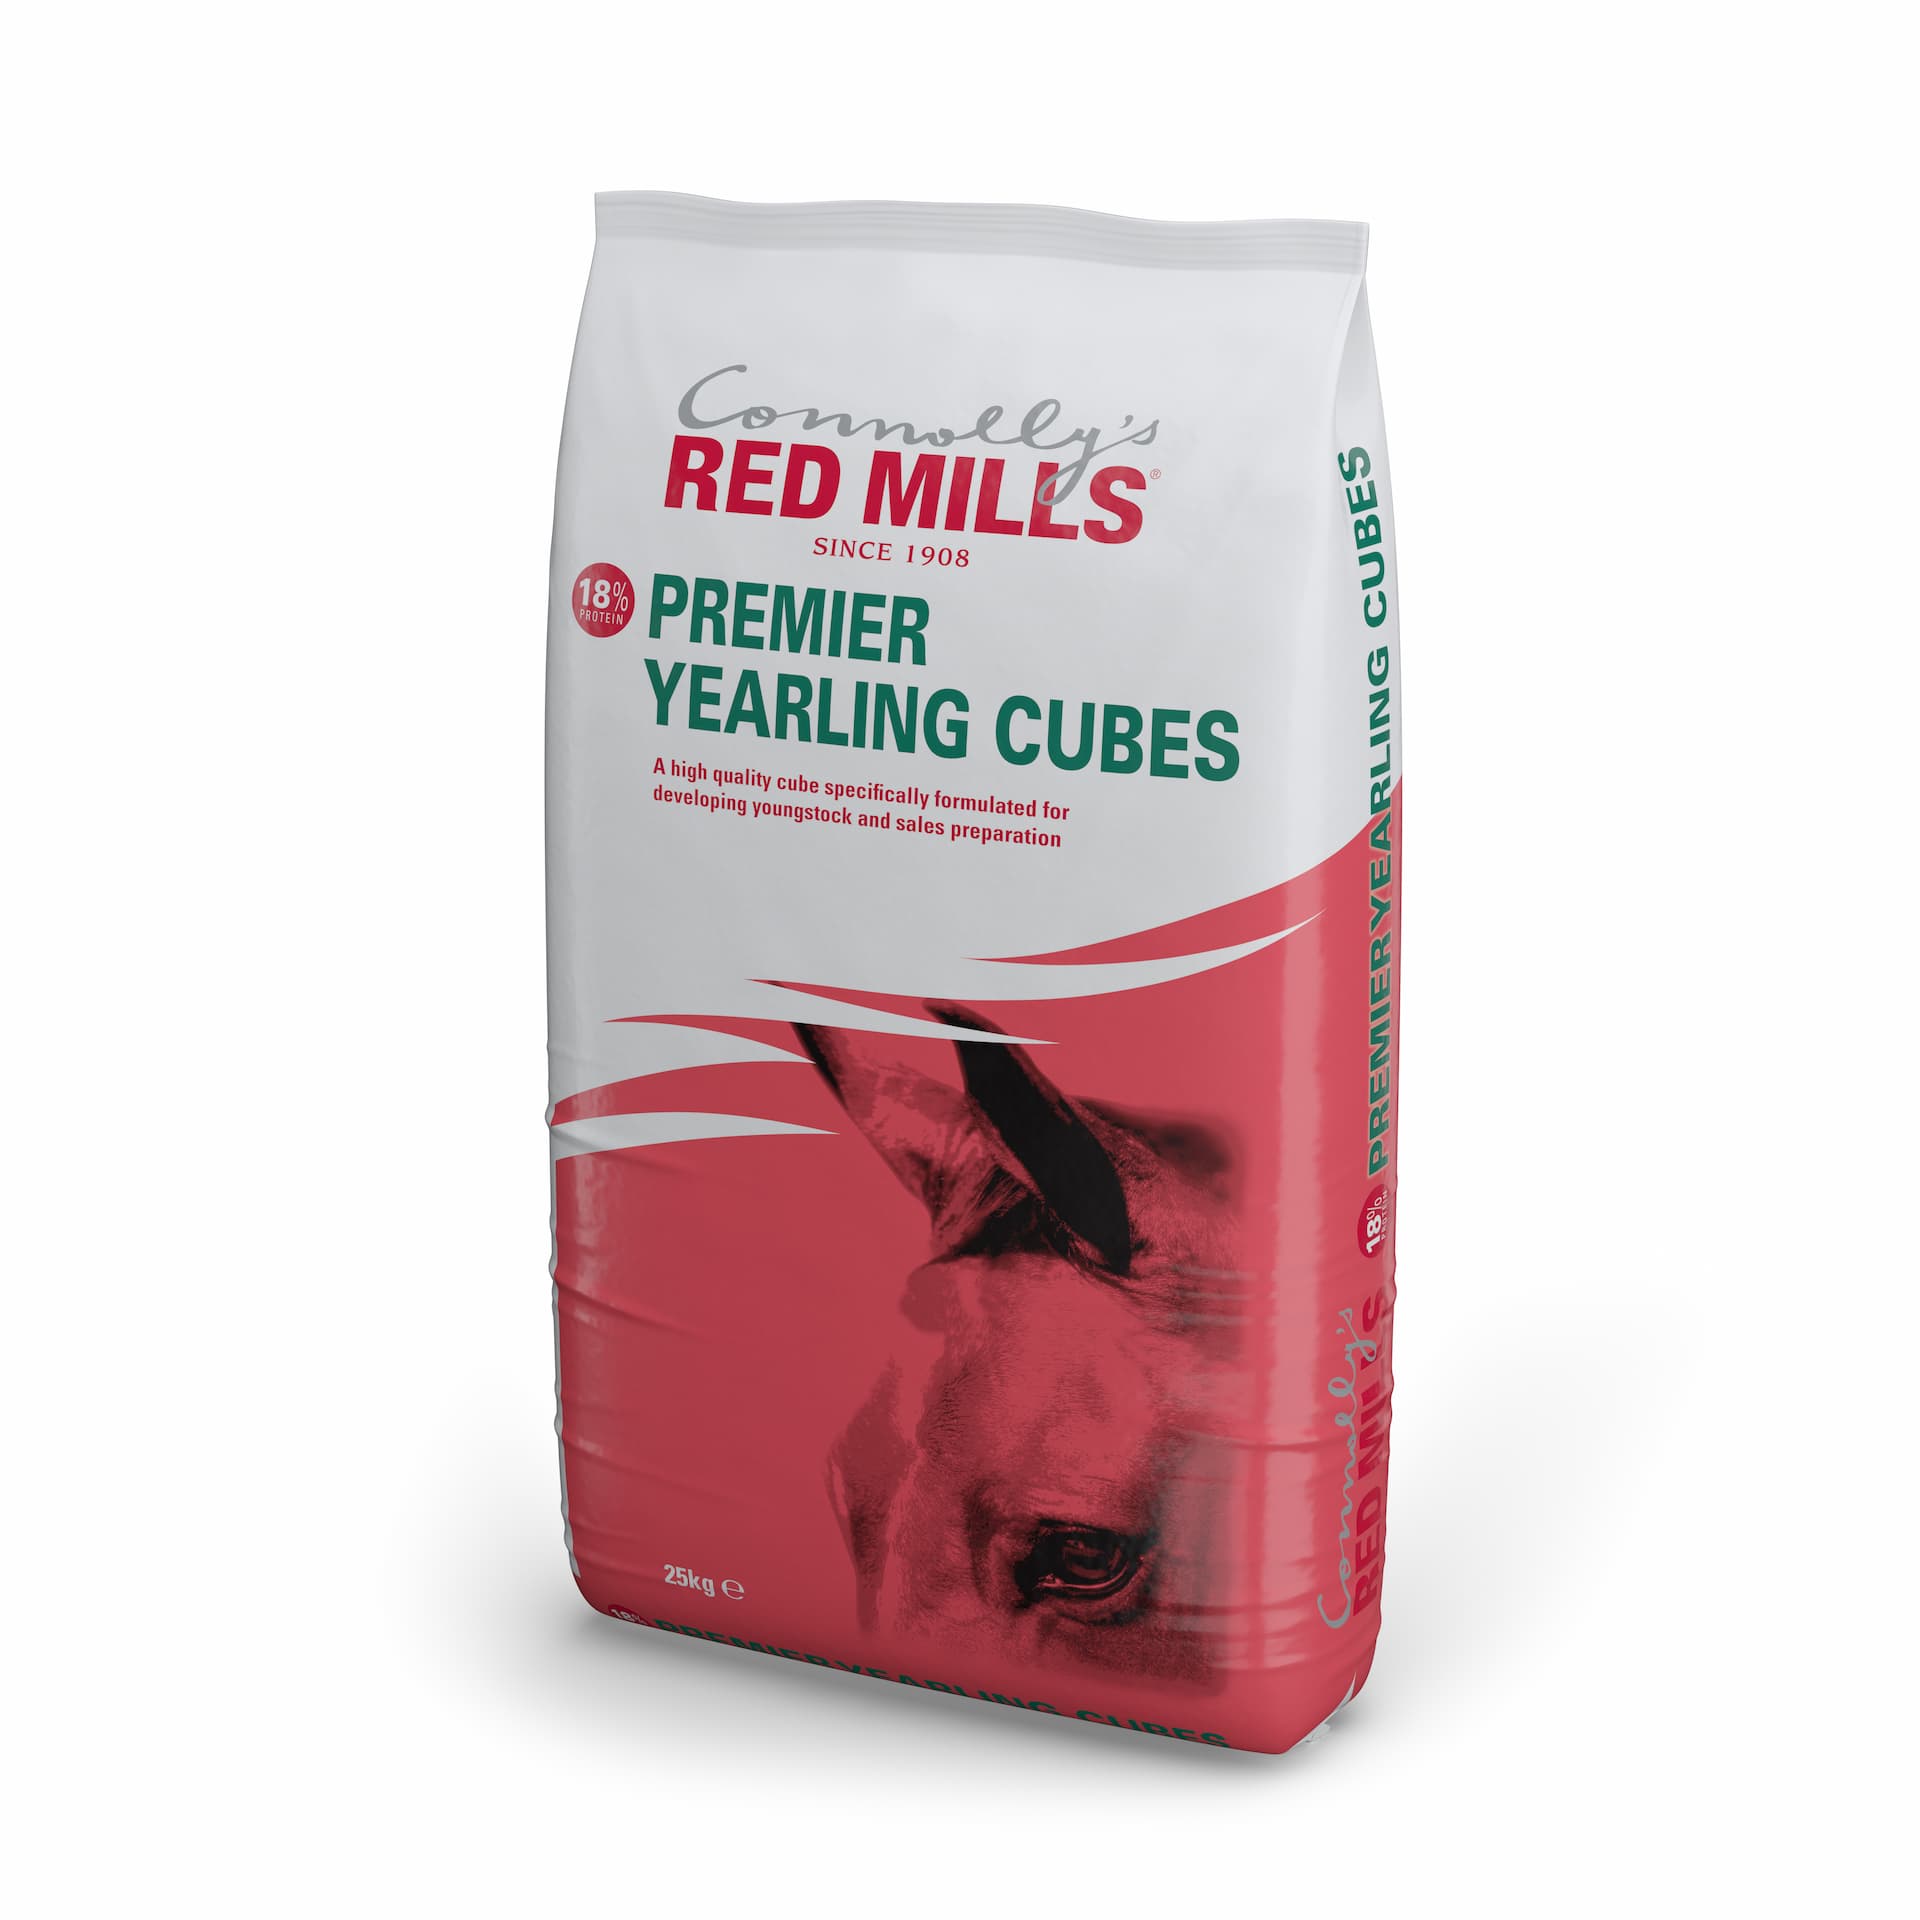 18% Premier Yearling Cubes